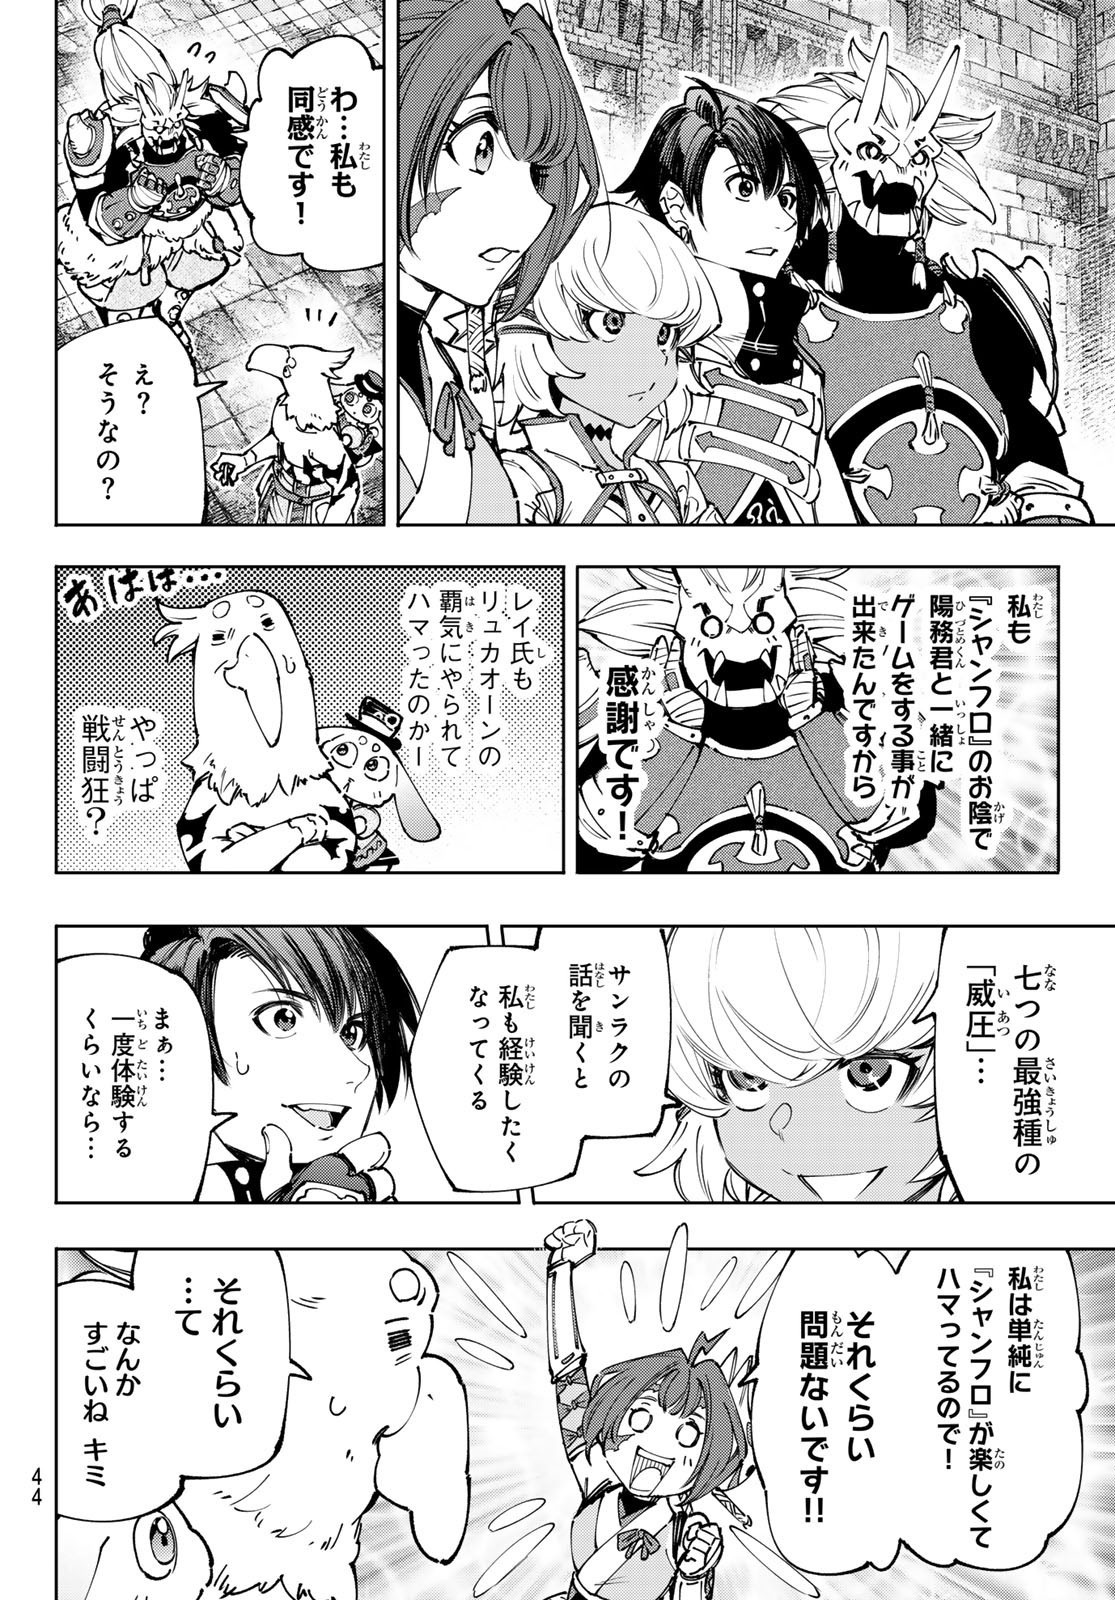 Weekly Shōnen Magazine - 週刊少年マガジン - Chapter 2024-24 - Page 44